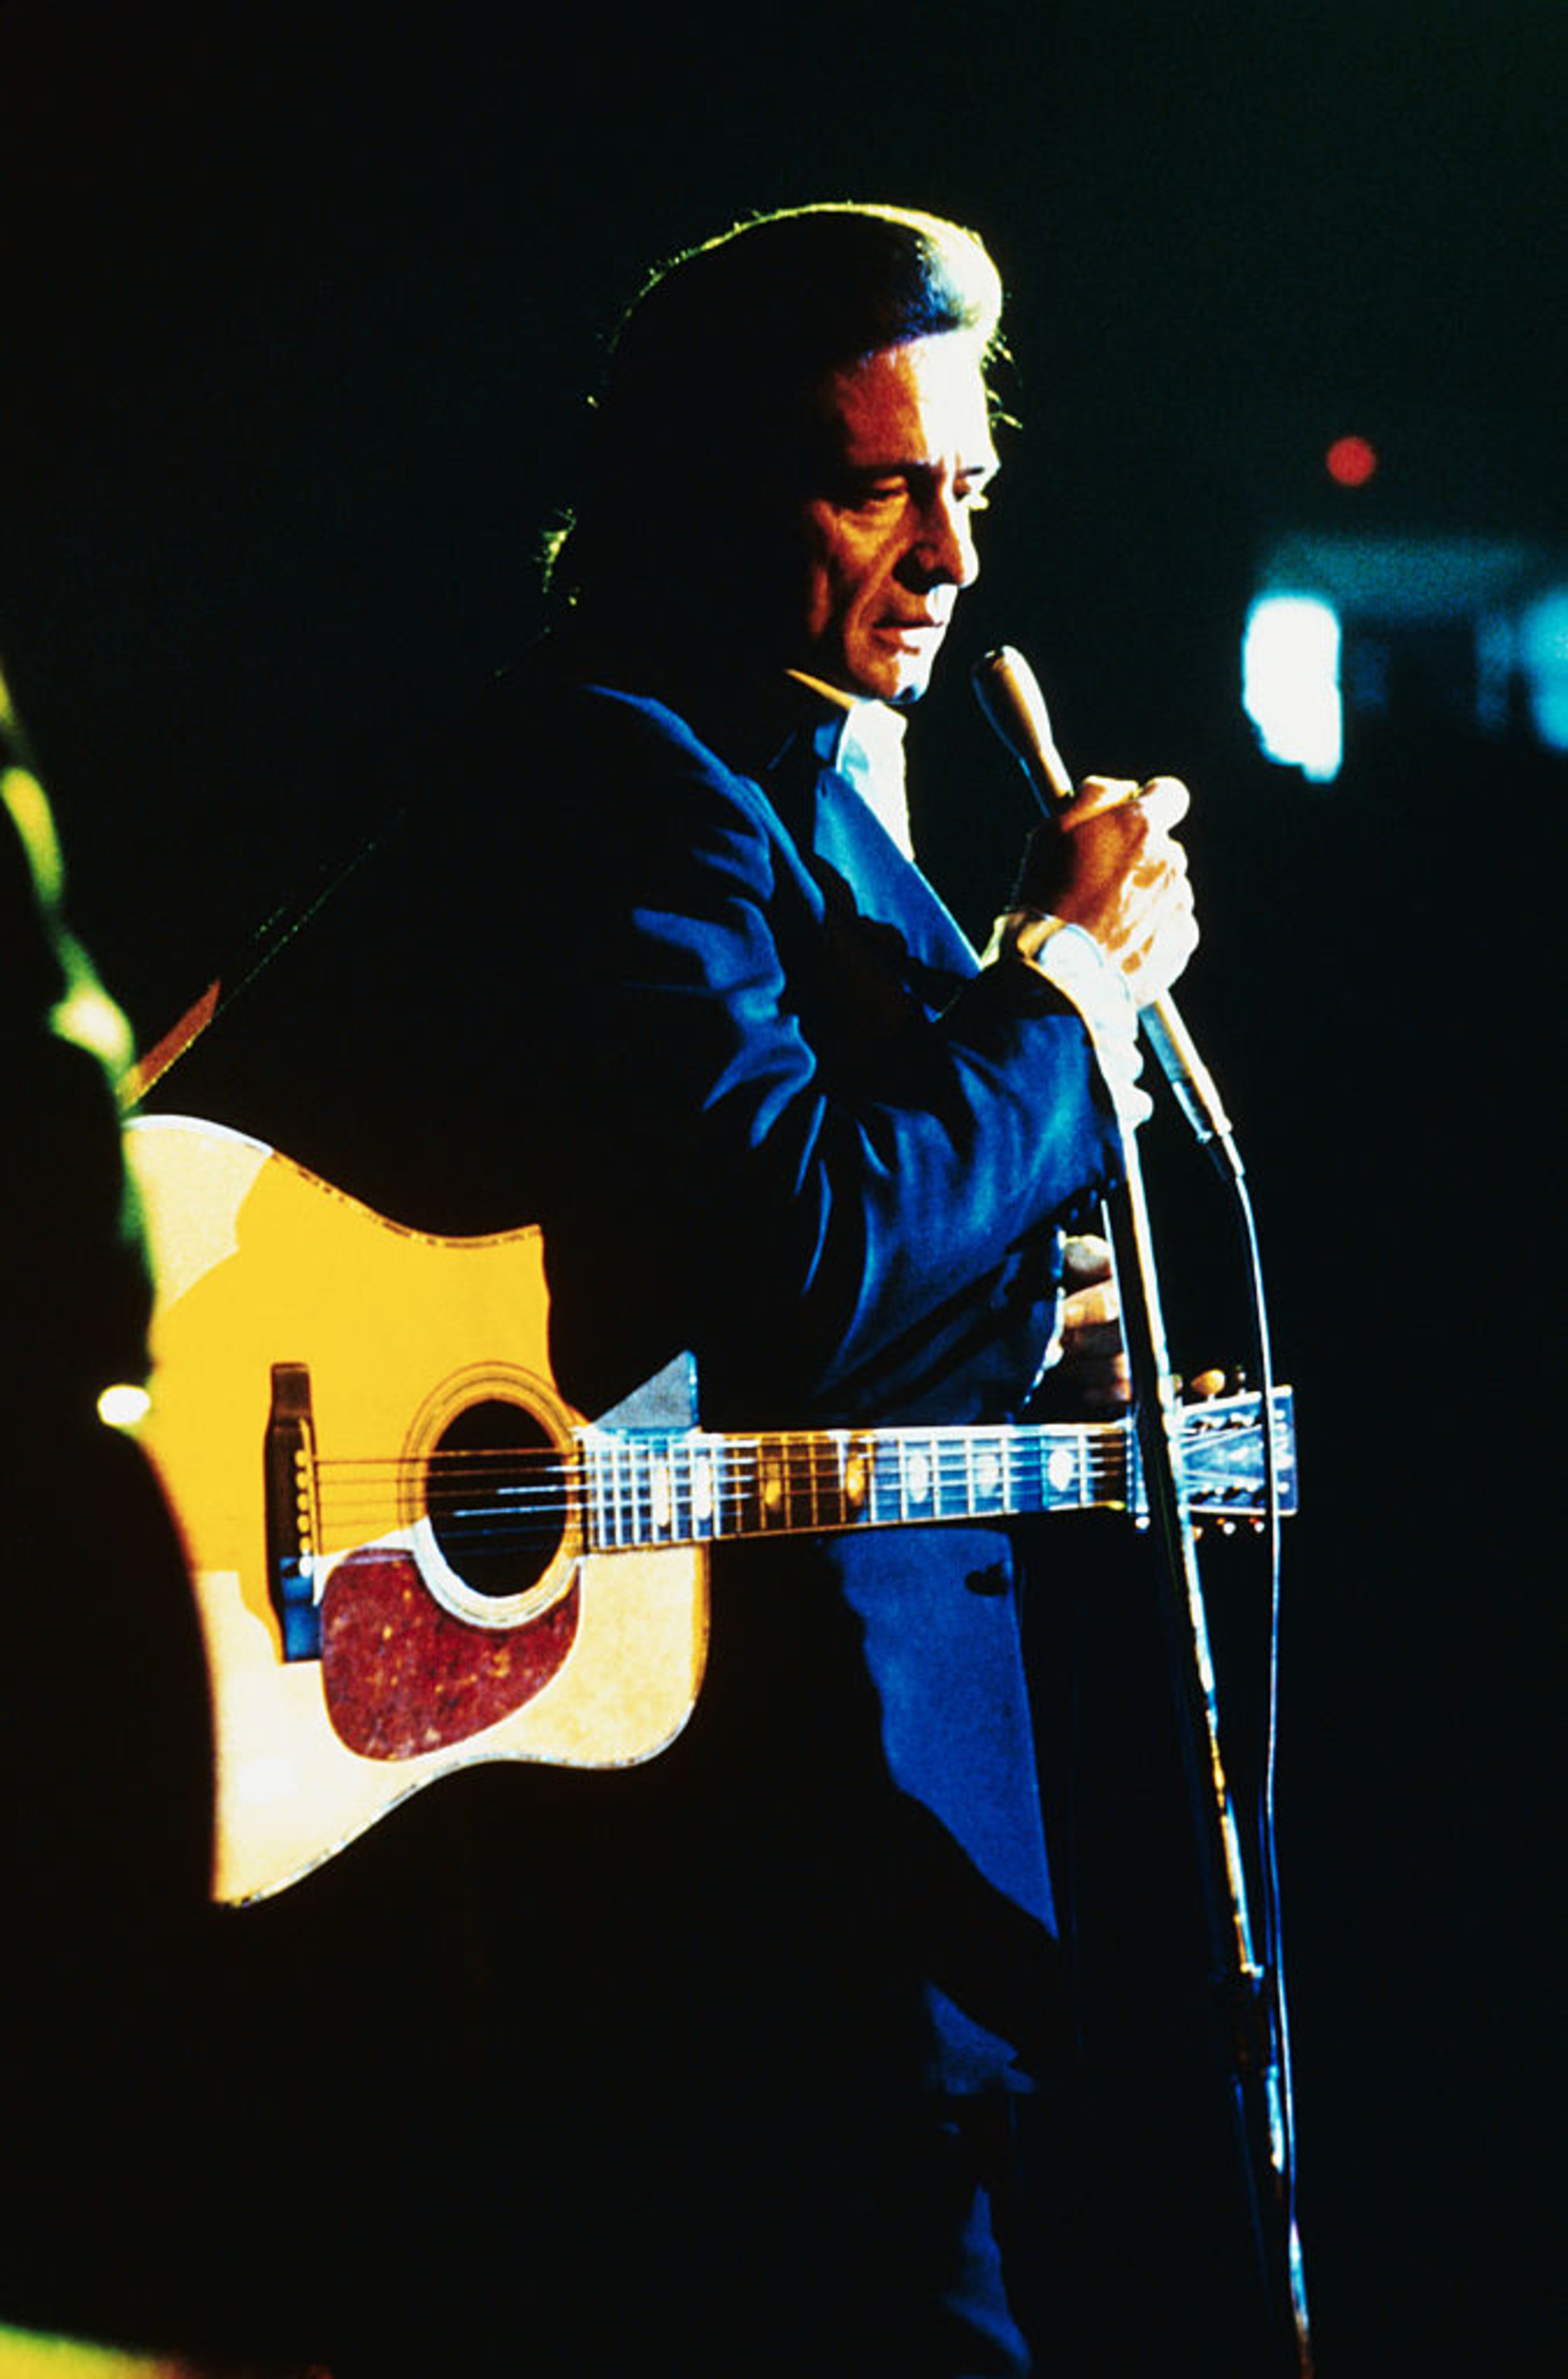 <p>Johnny Cash lists off too many American destinations to count in "I've Been Everywhere," making it an obvious addition to the soundtrack for a great American road trip. Even if you're not going to Dayton, Ohio or Tulsa, Oklahoma, the appeal of this song is totally universal. </p><p>You may also like: <a href='https://www.yardbarker.com/entertainment/articles/thanks_for_nothing_academy_the_biggest_snubs_in_oscar_history_111623/s1__28246661'>Thanks for nothing, Academy: The biggest snubs in Oscar history</a></p>